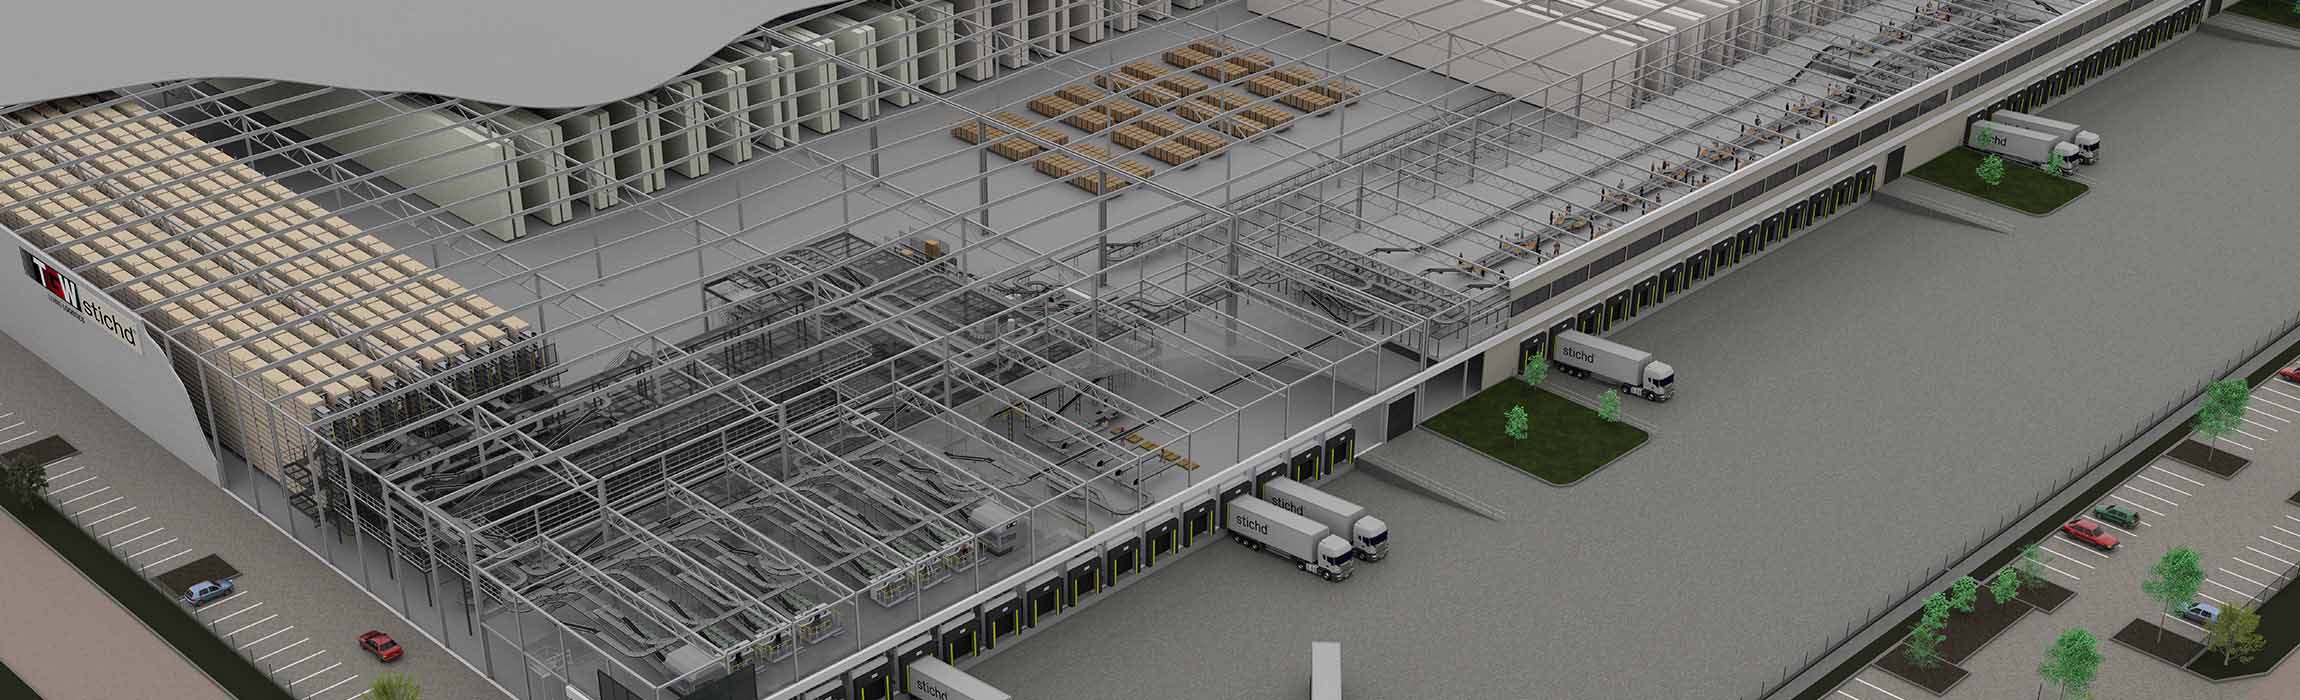 Highly automated fulfilment centre by TGW for stichd.